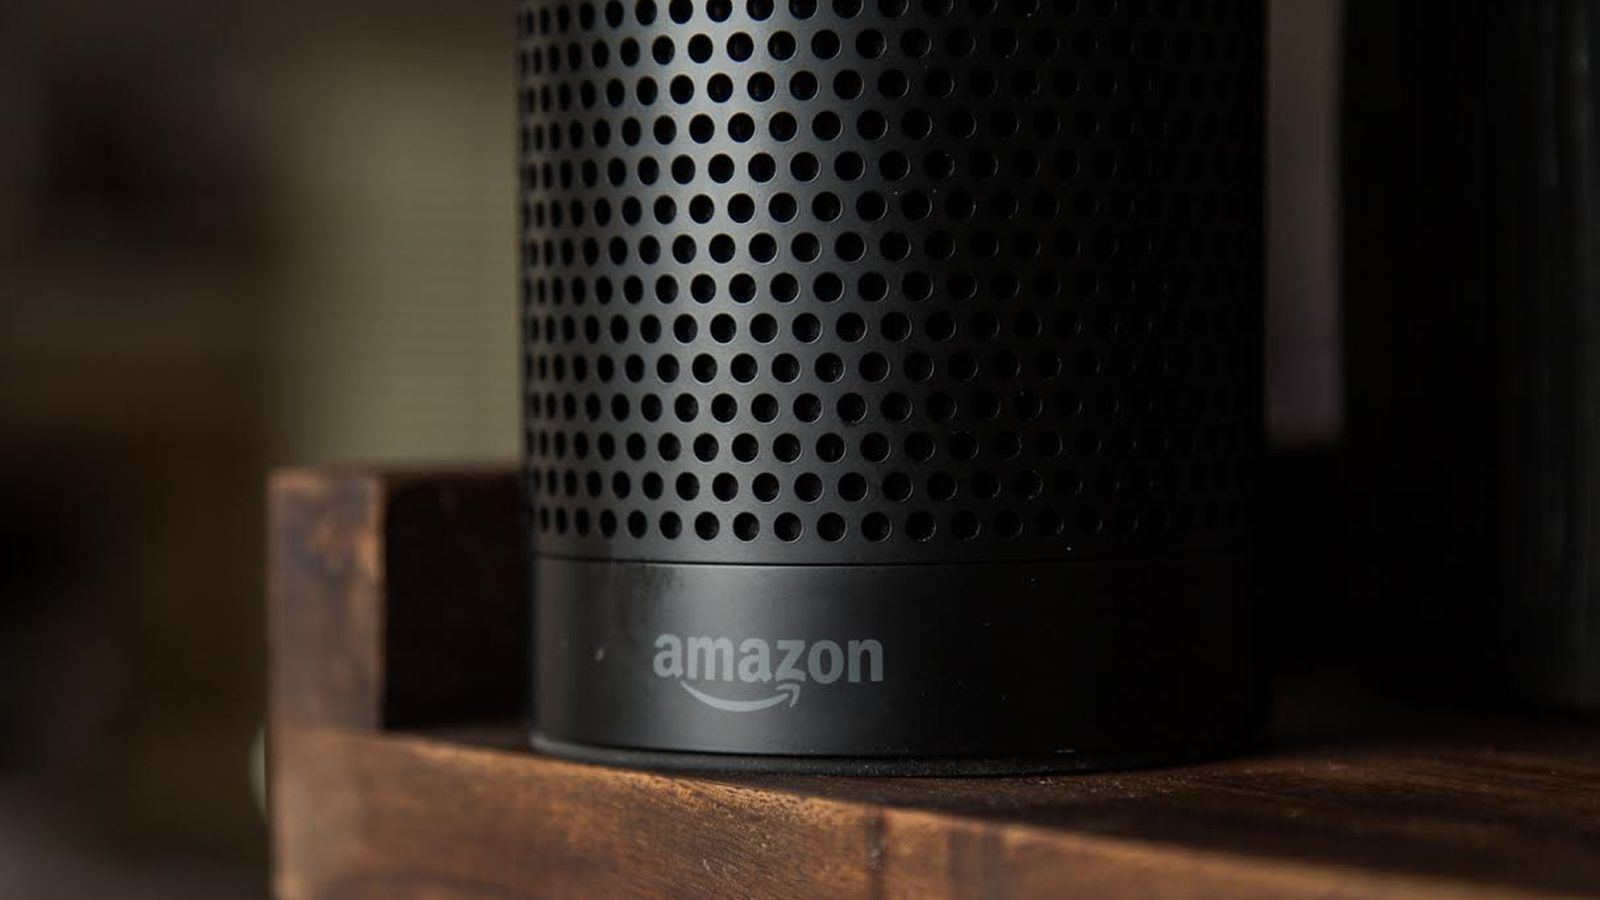 Amazon Plans To Release New Alexa Devices That Can Do Something Huge